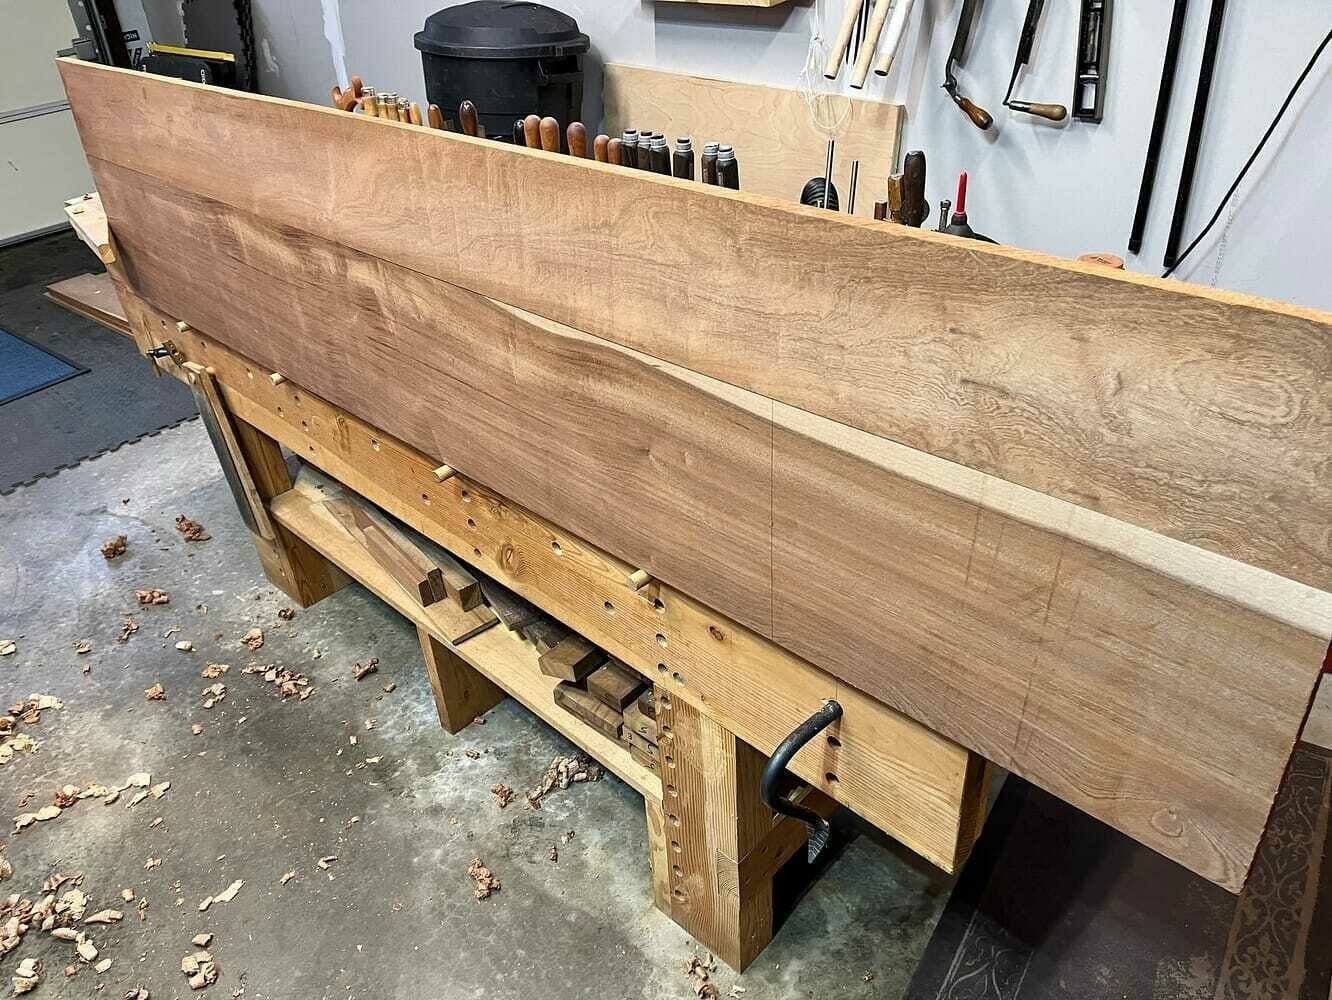 two long sapele boards aligned and glued together on shop bench.